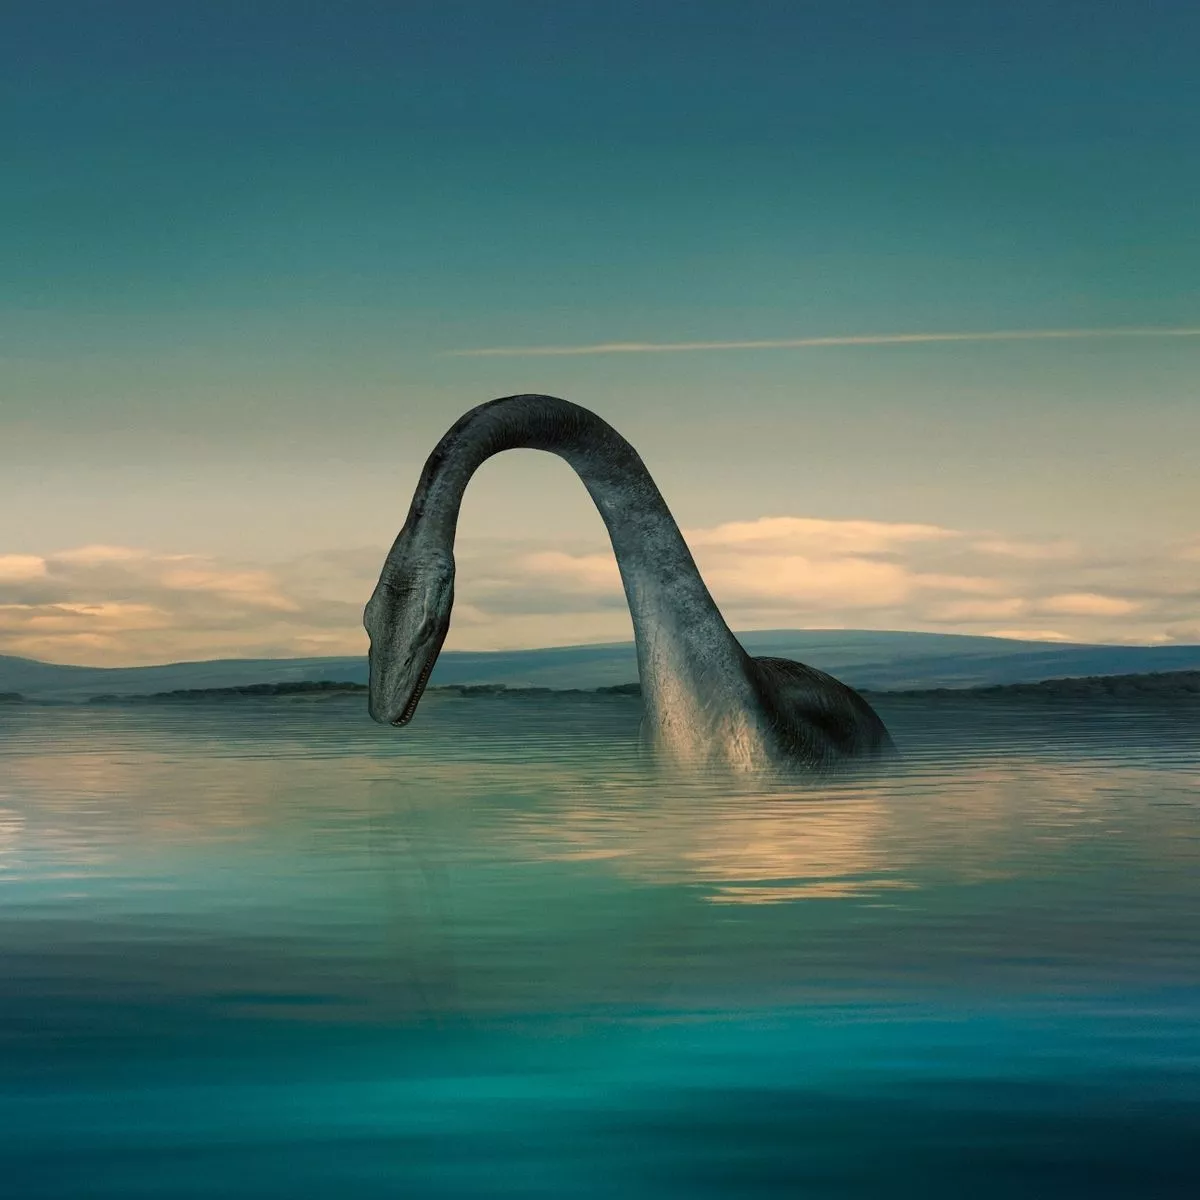 Loch Ness Monster Wallpapers - Top Free Loch Ness Monster Backgrounds ...